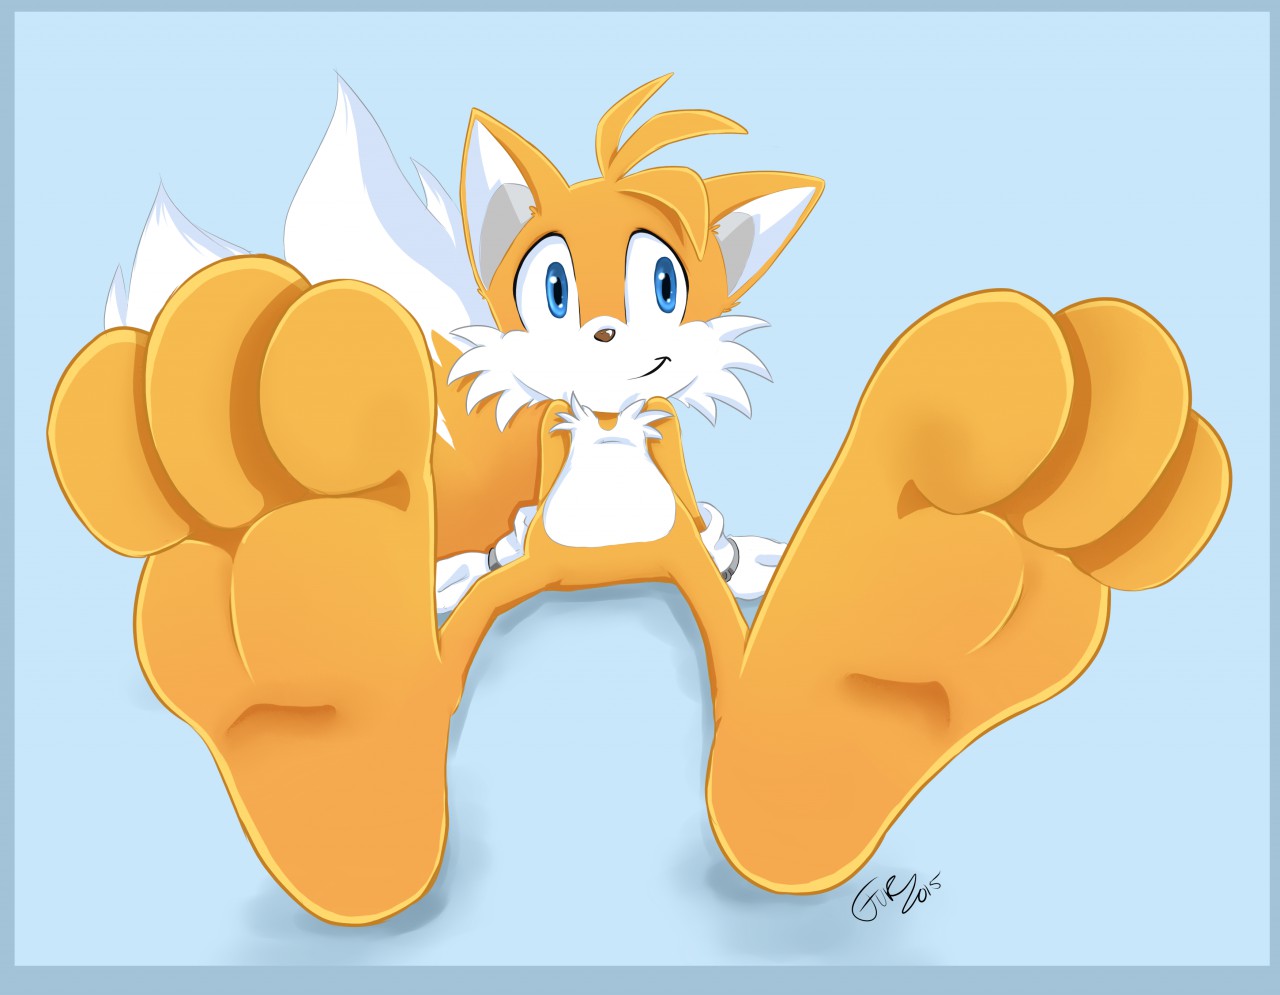 Tails showing off his feet M (Tails-Chan) .